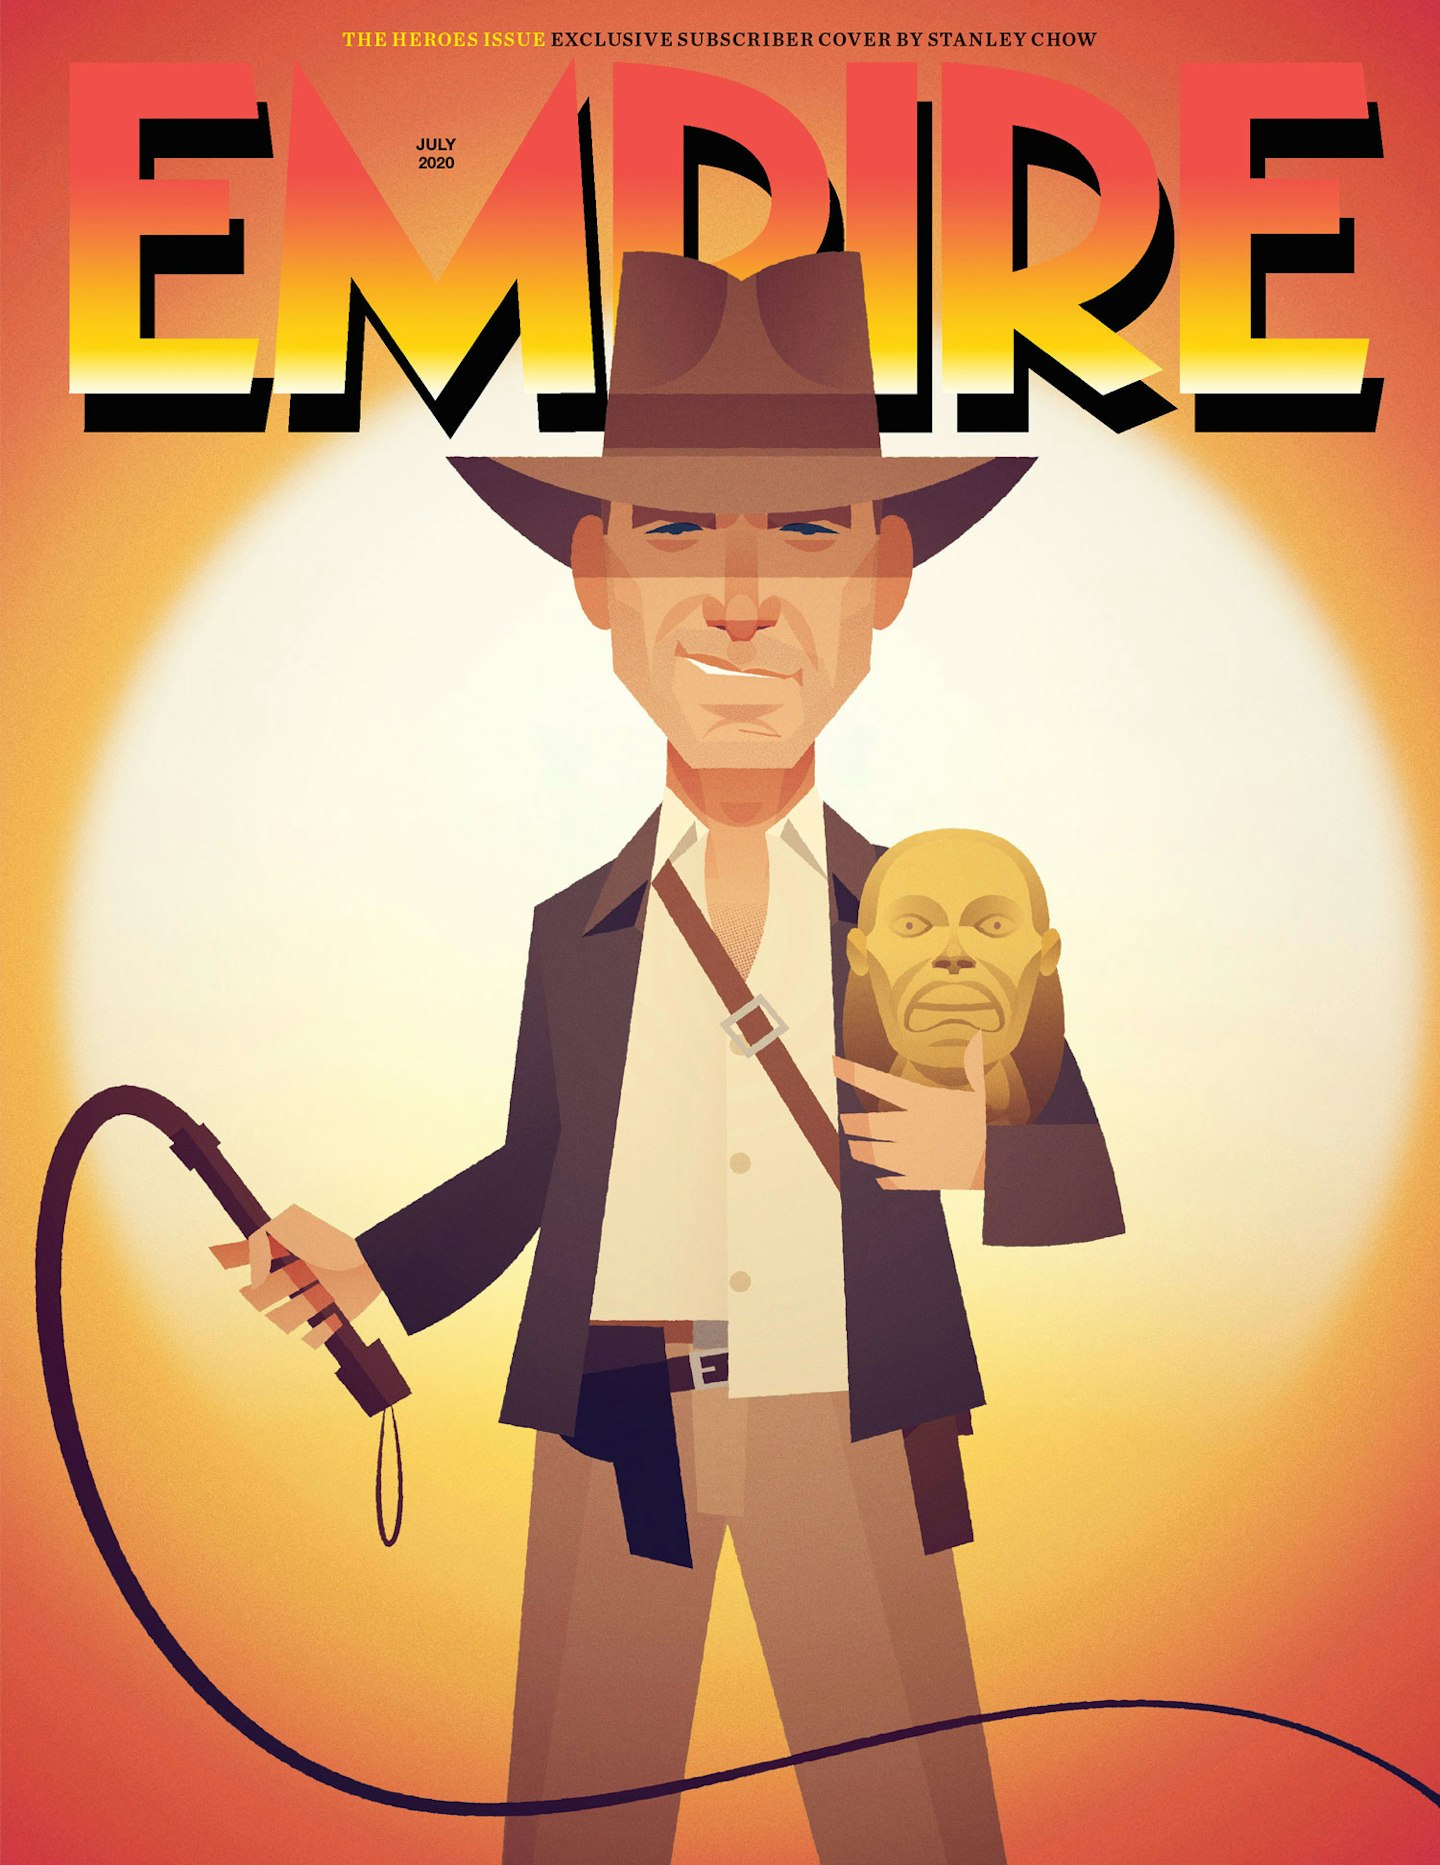 Empire – July 2020 issue subscriber cover